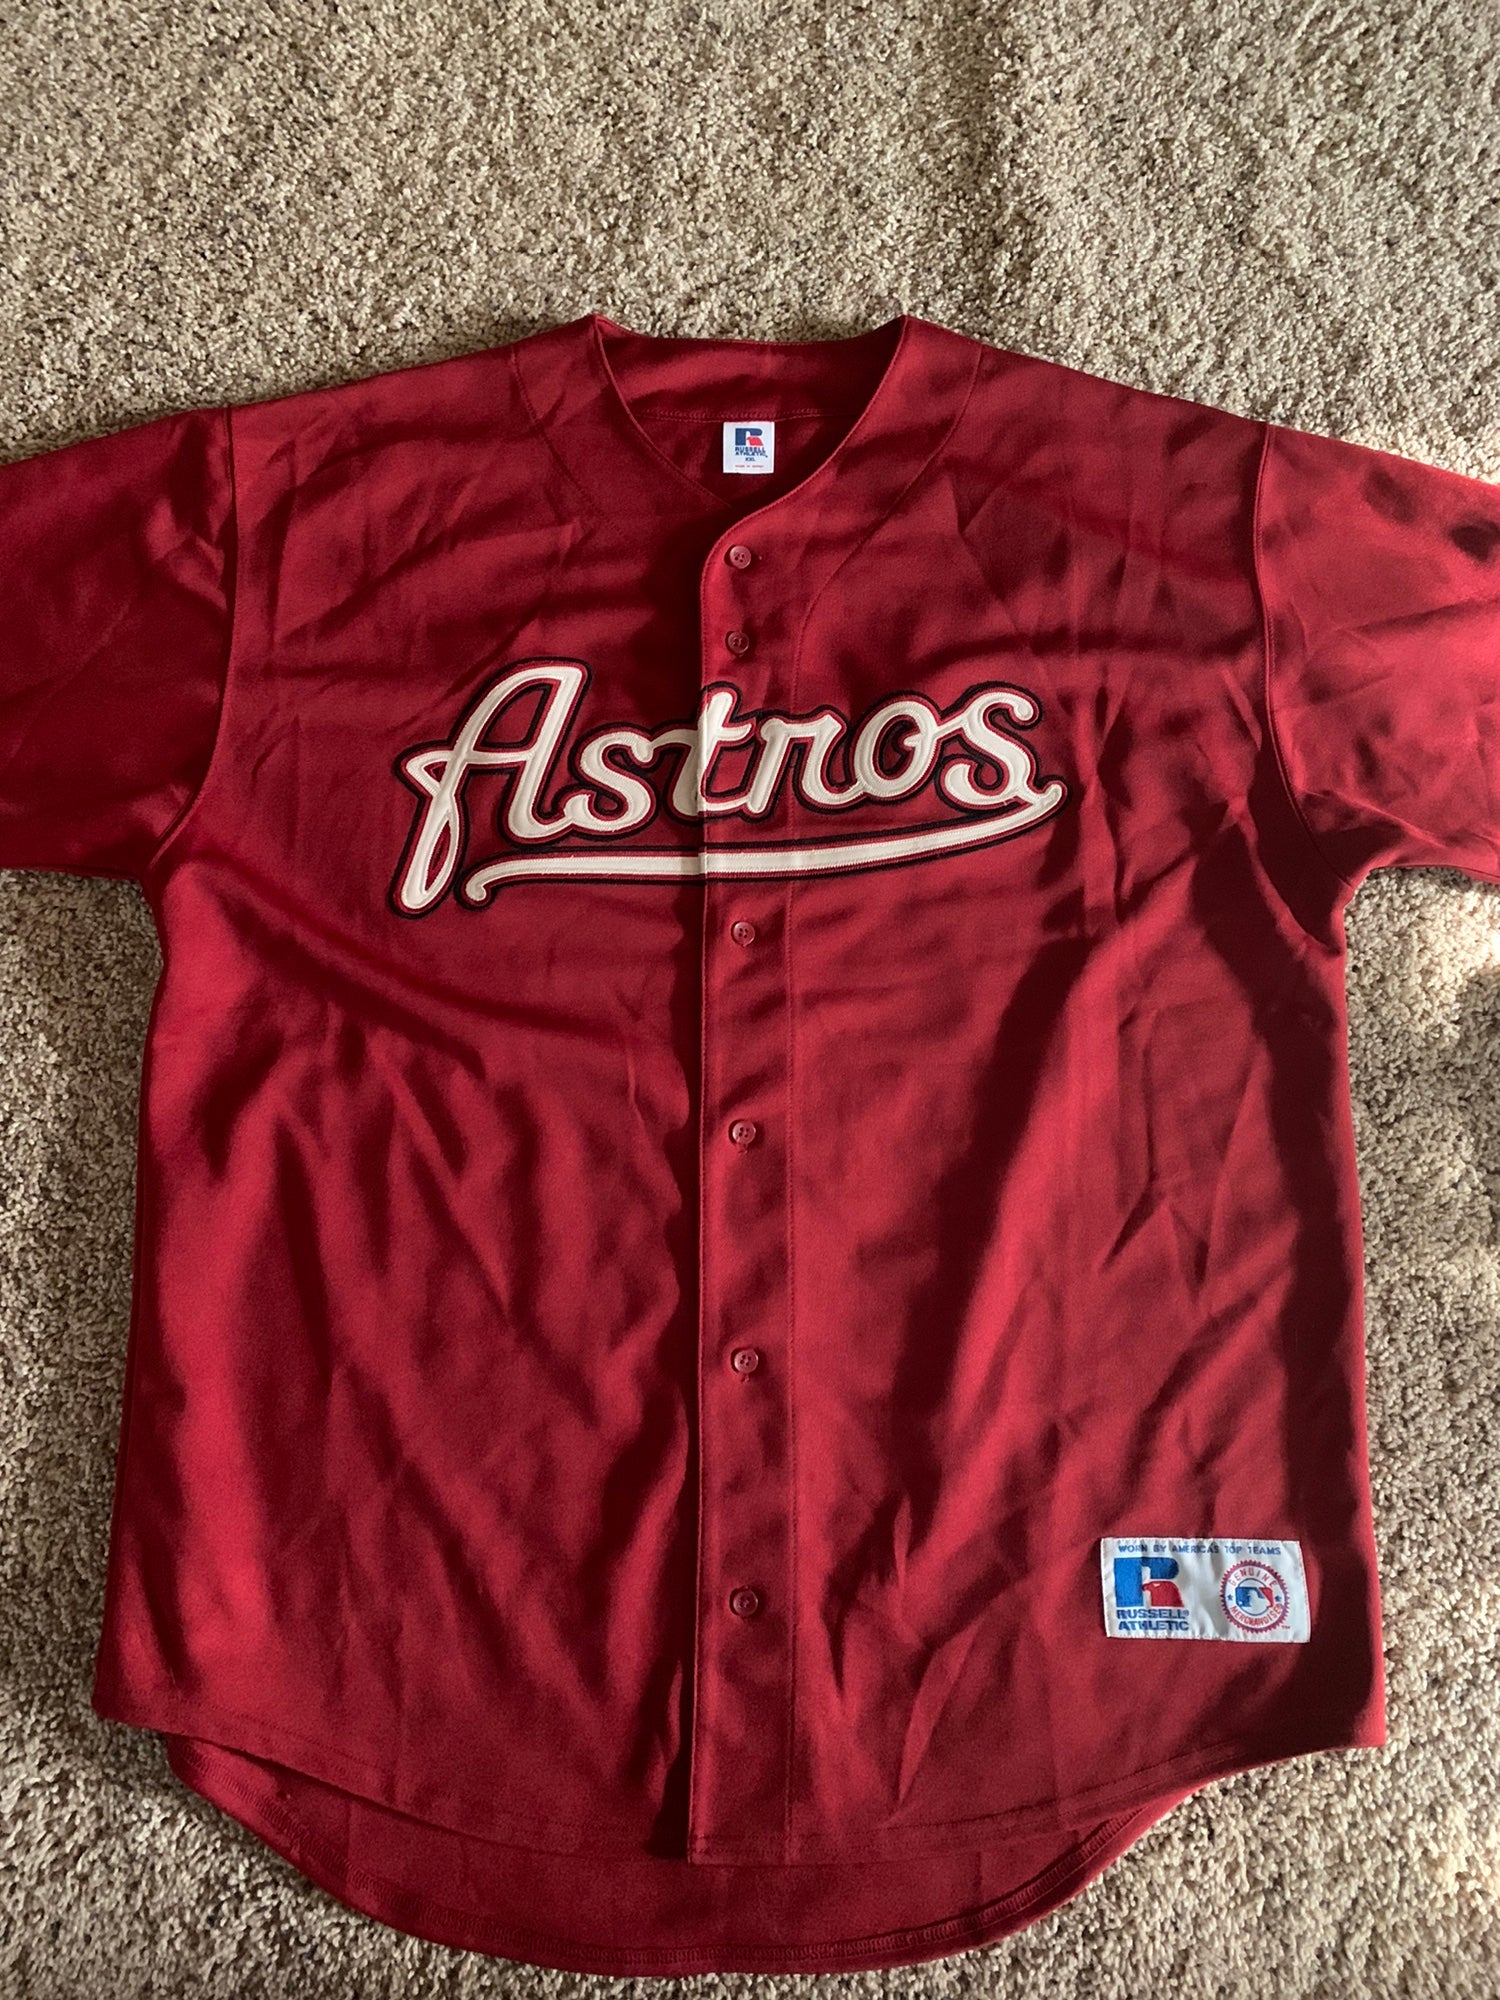 astros jersey red